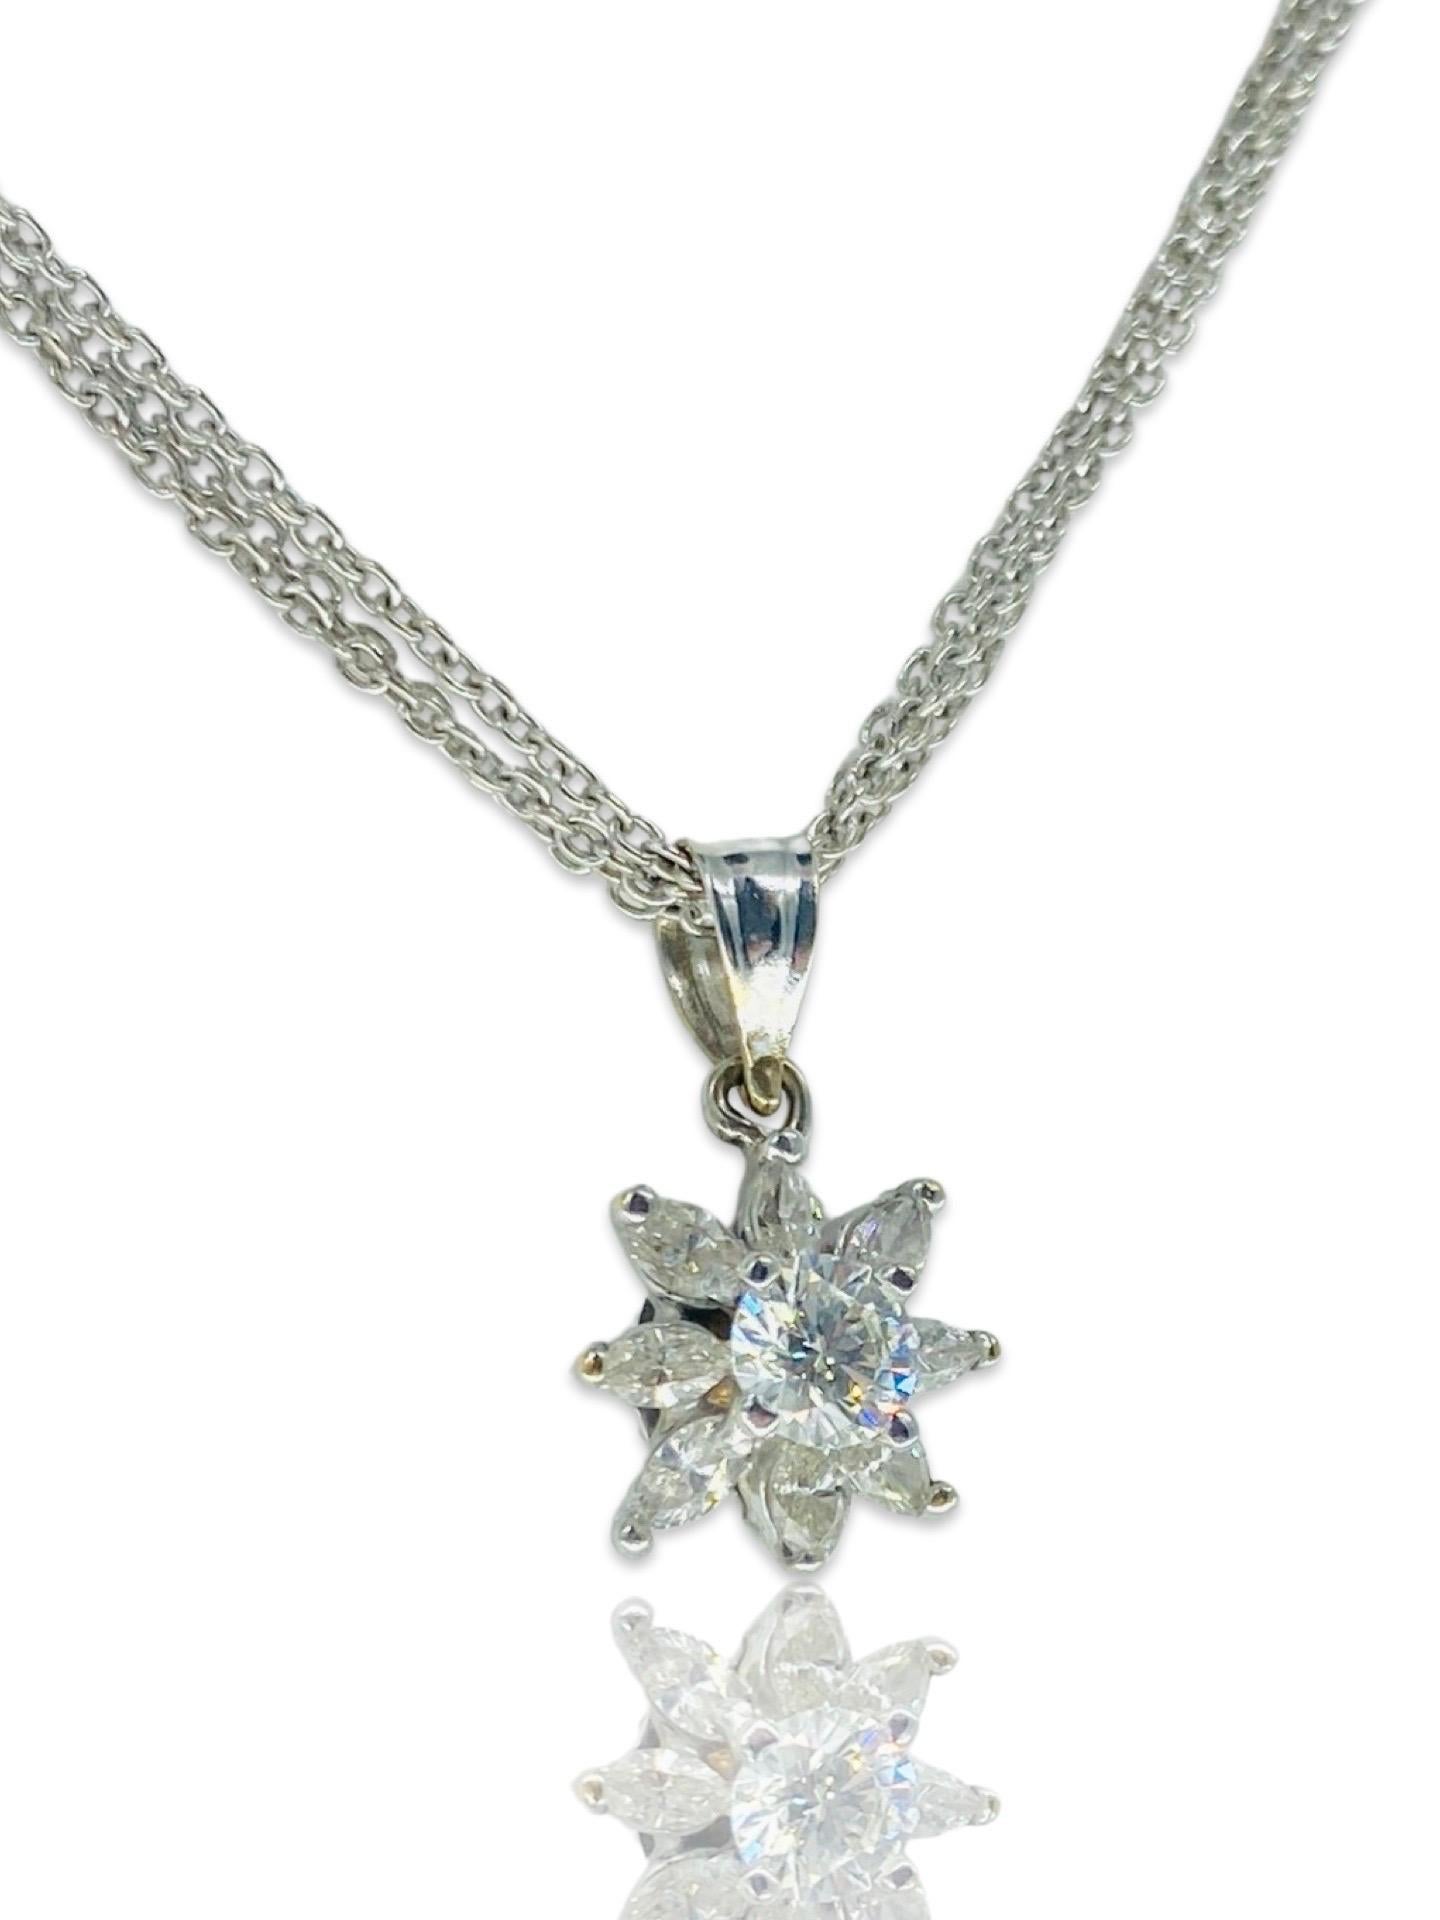 Vintage 0.75 Carat Diamonds Marquise Leaf Floral Pendant Necklace 18k White Gold In Excellent Condition For Sale In Miami, FL